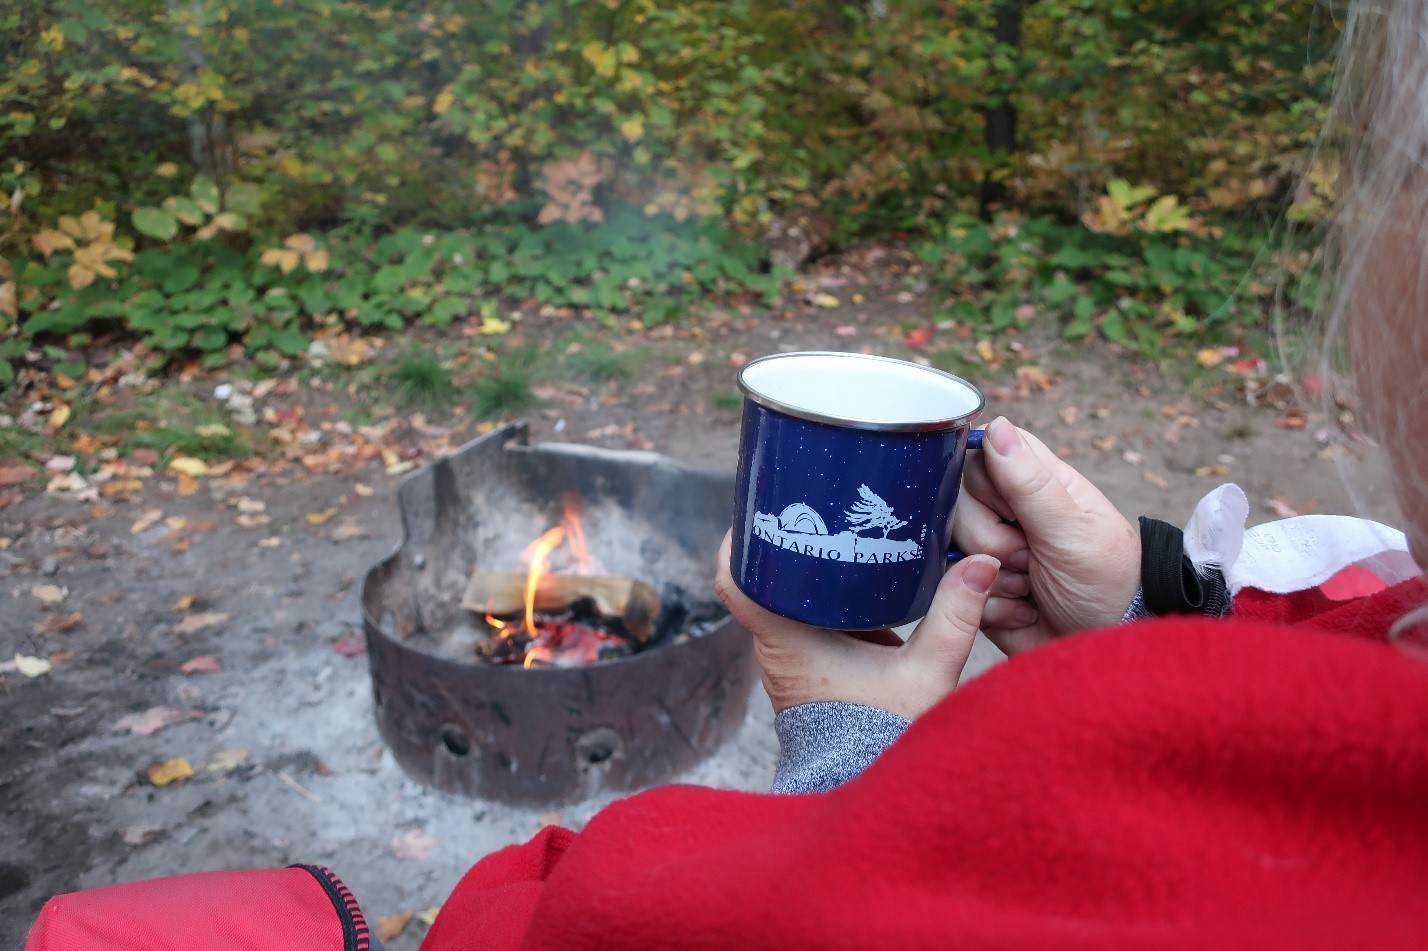 hands holding OP mug in front of campfire